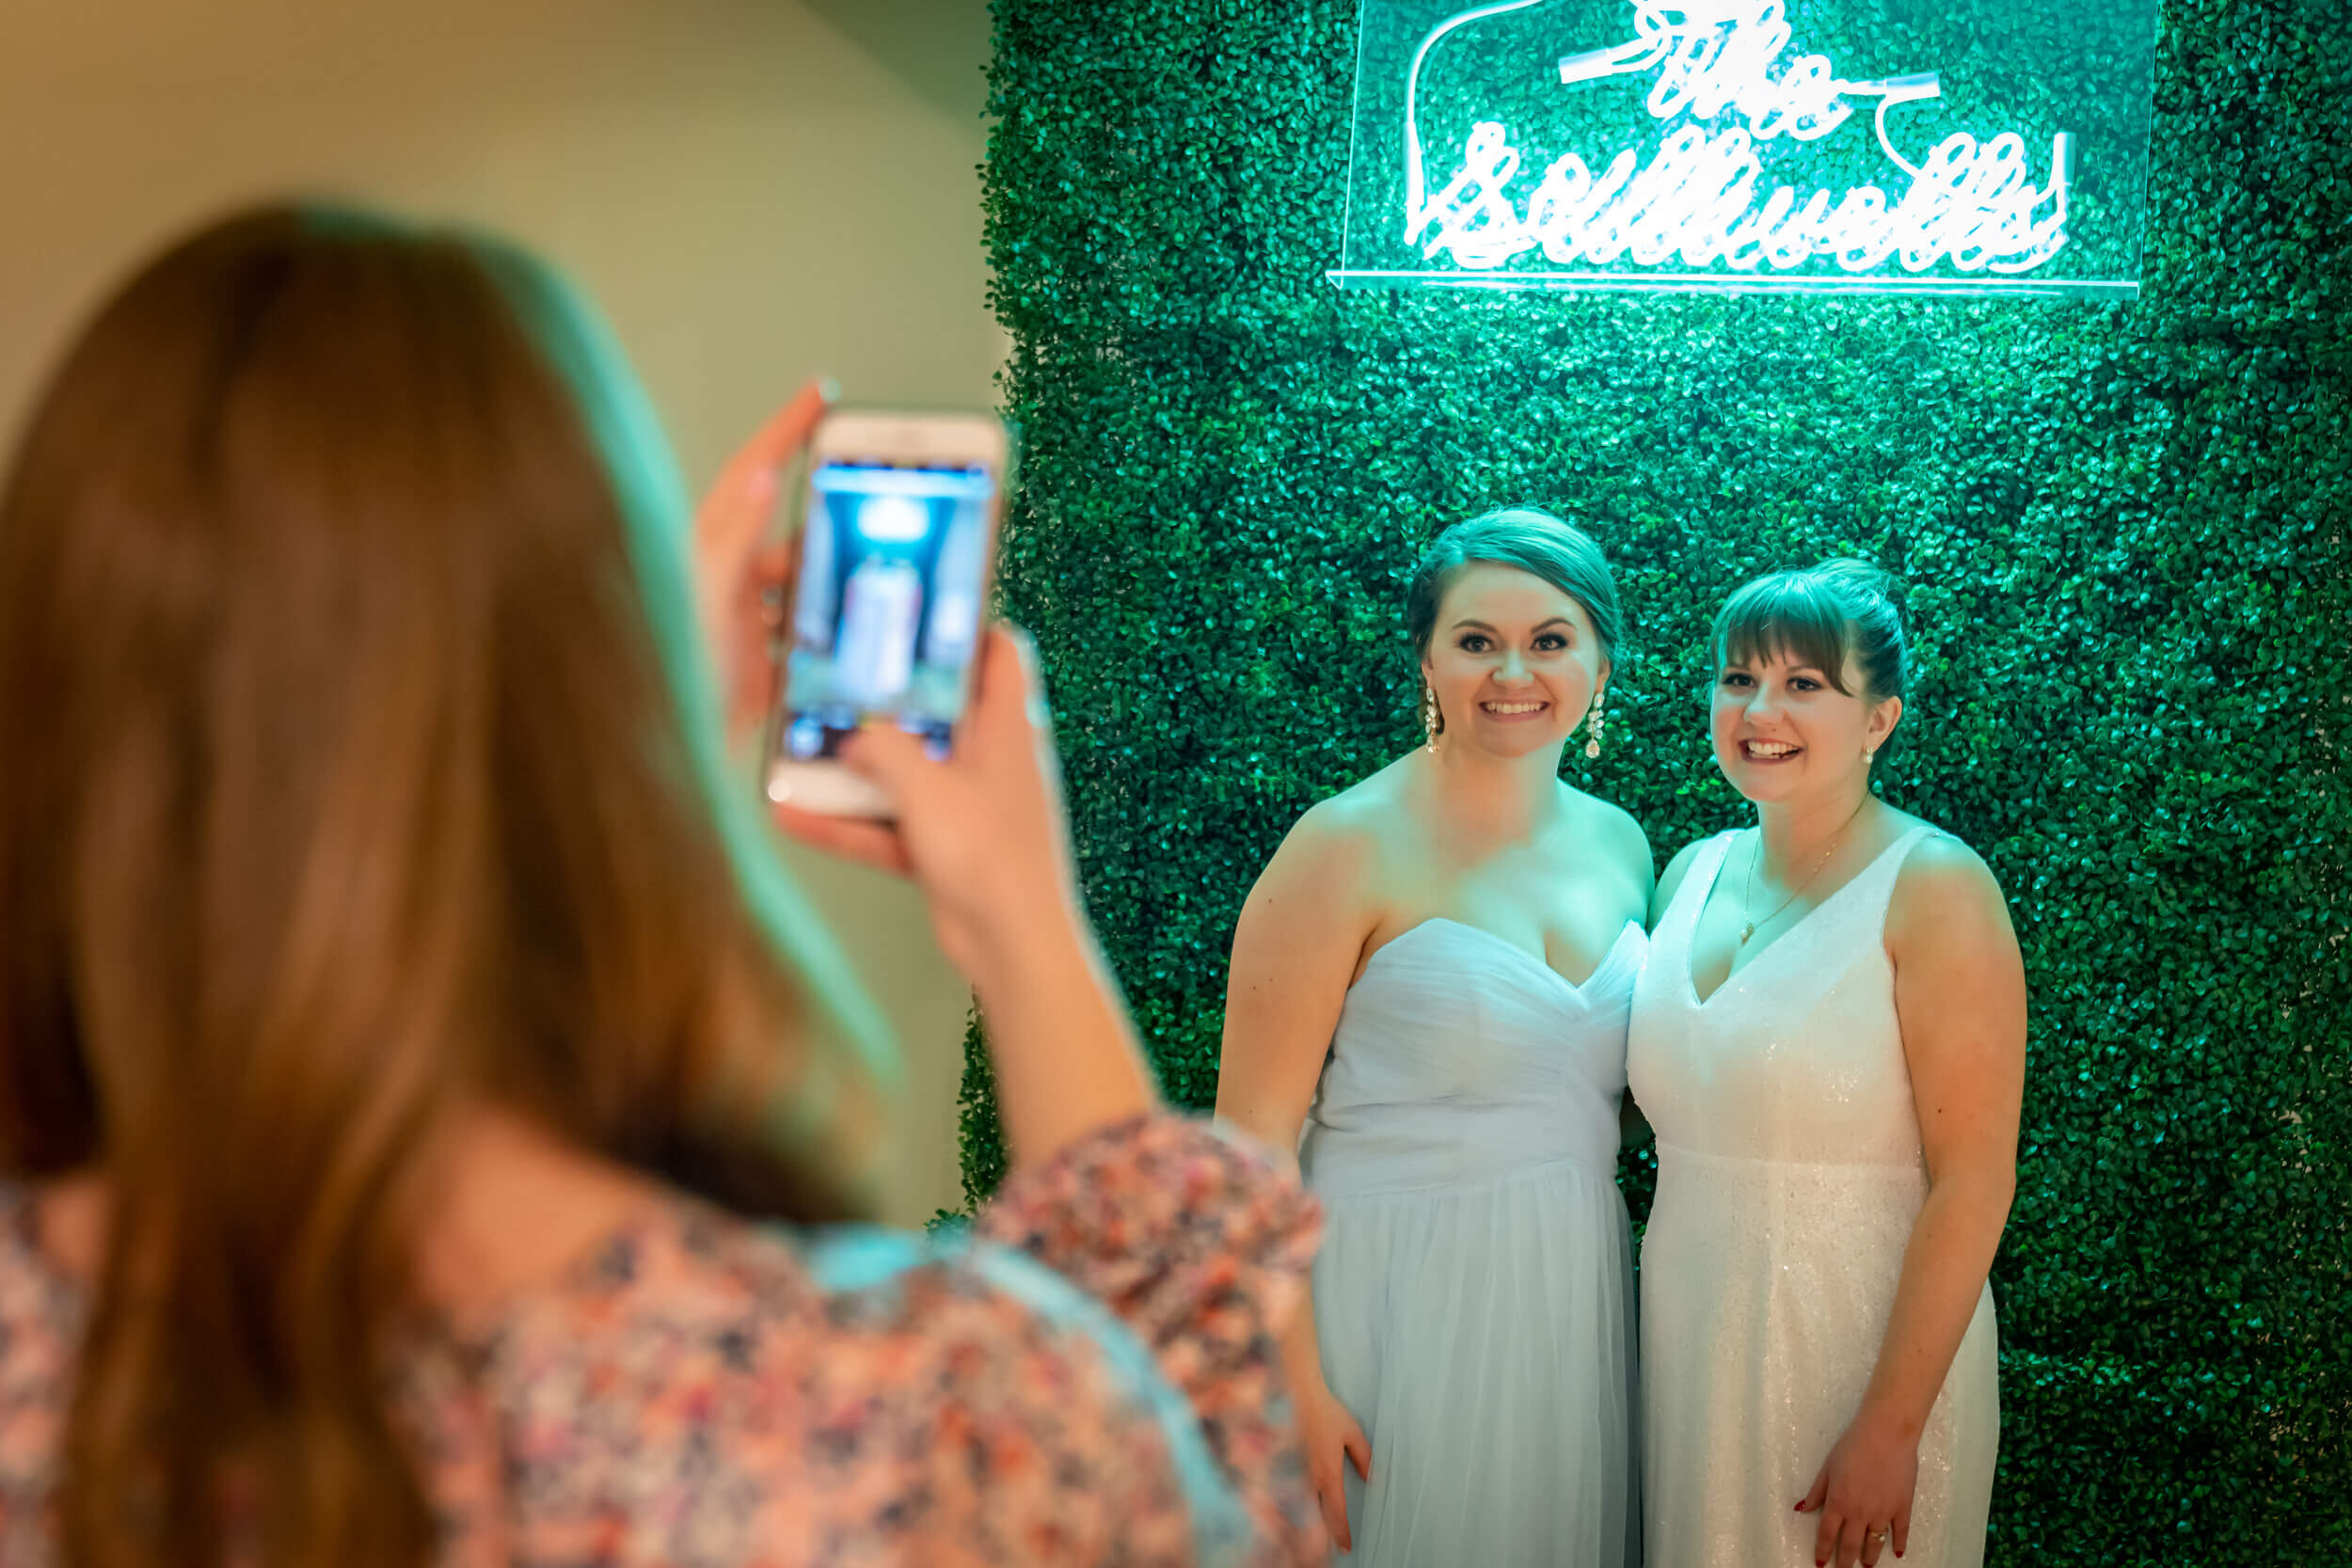 Use neon wedding signs for photo booth